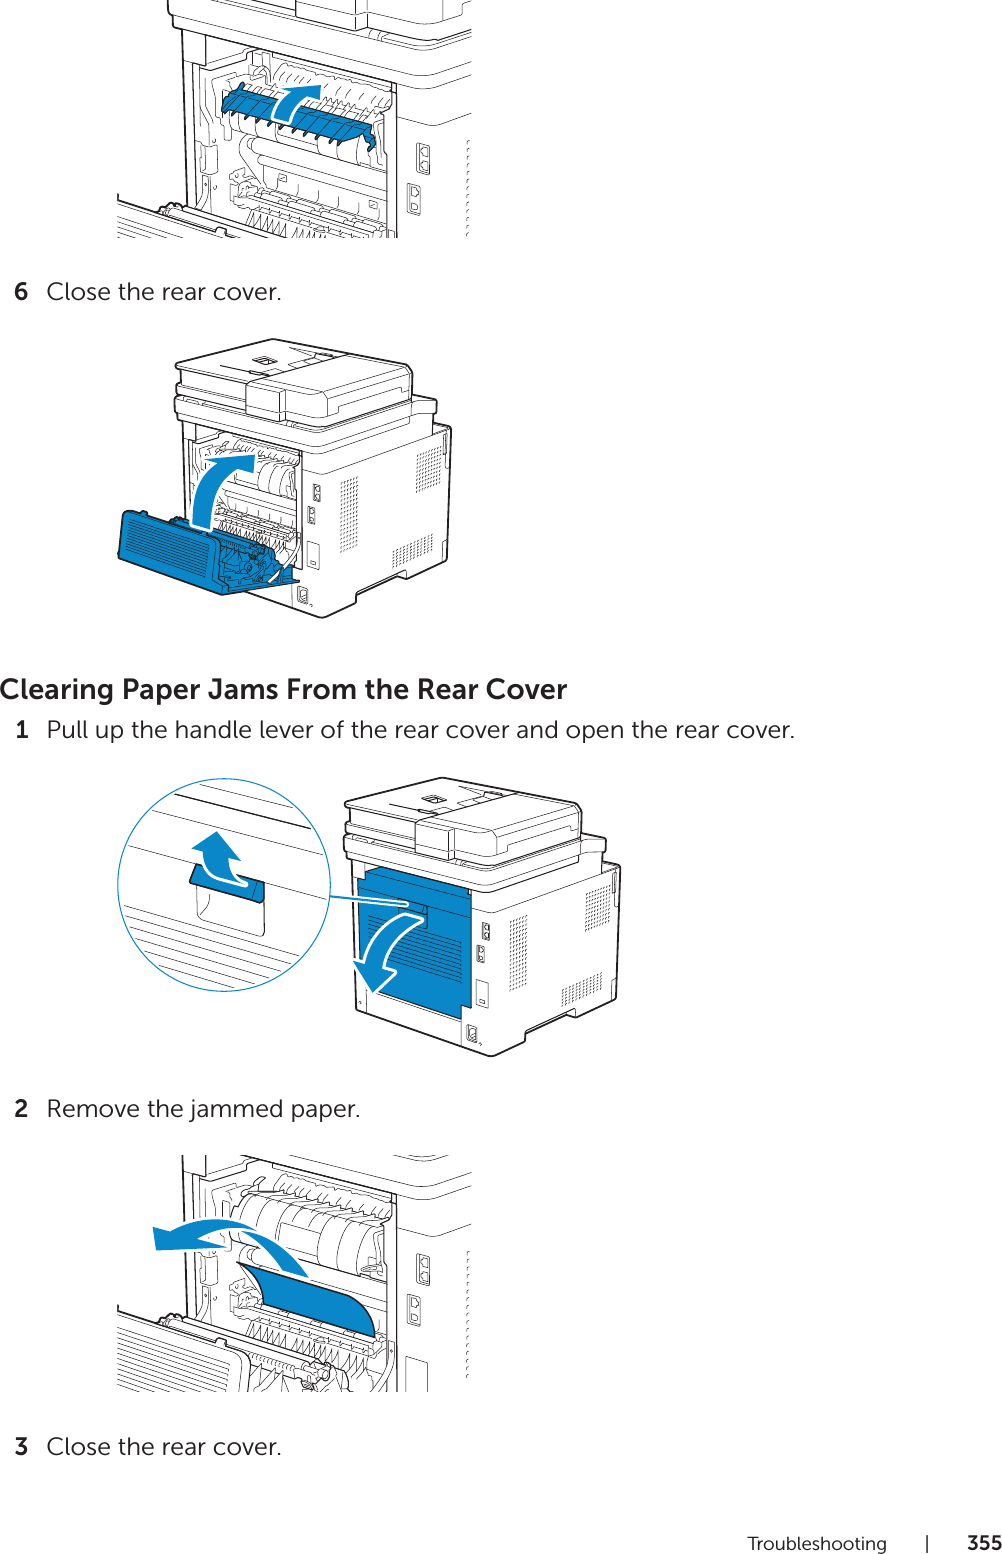 Troubleshooting |3556Close the rear cover.Clearing Paper Jams From the Rear Cover1Pull up the handle lever of the rear cover and open the rear cover.2Remove the jammed paper.3Close the rear cover.